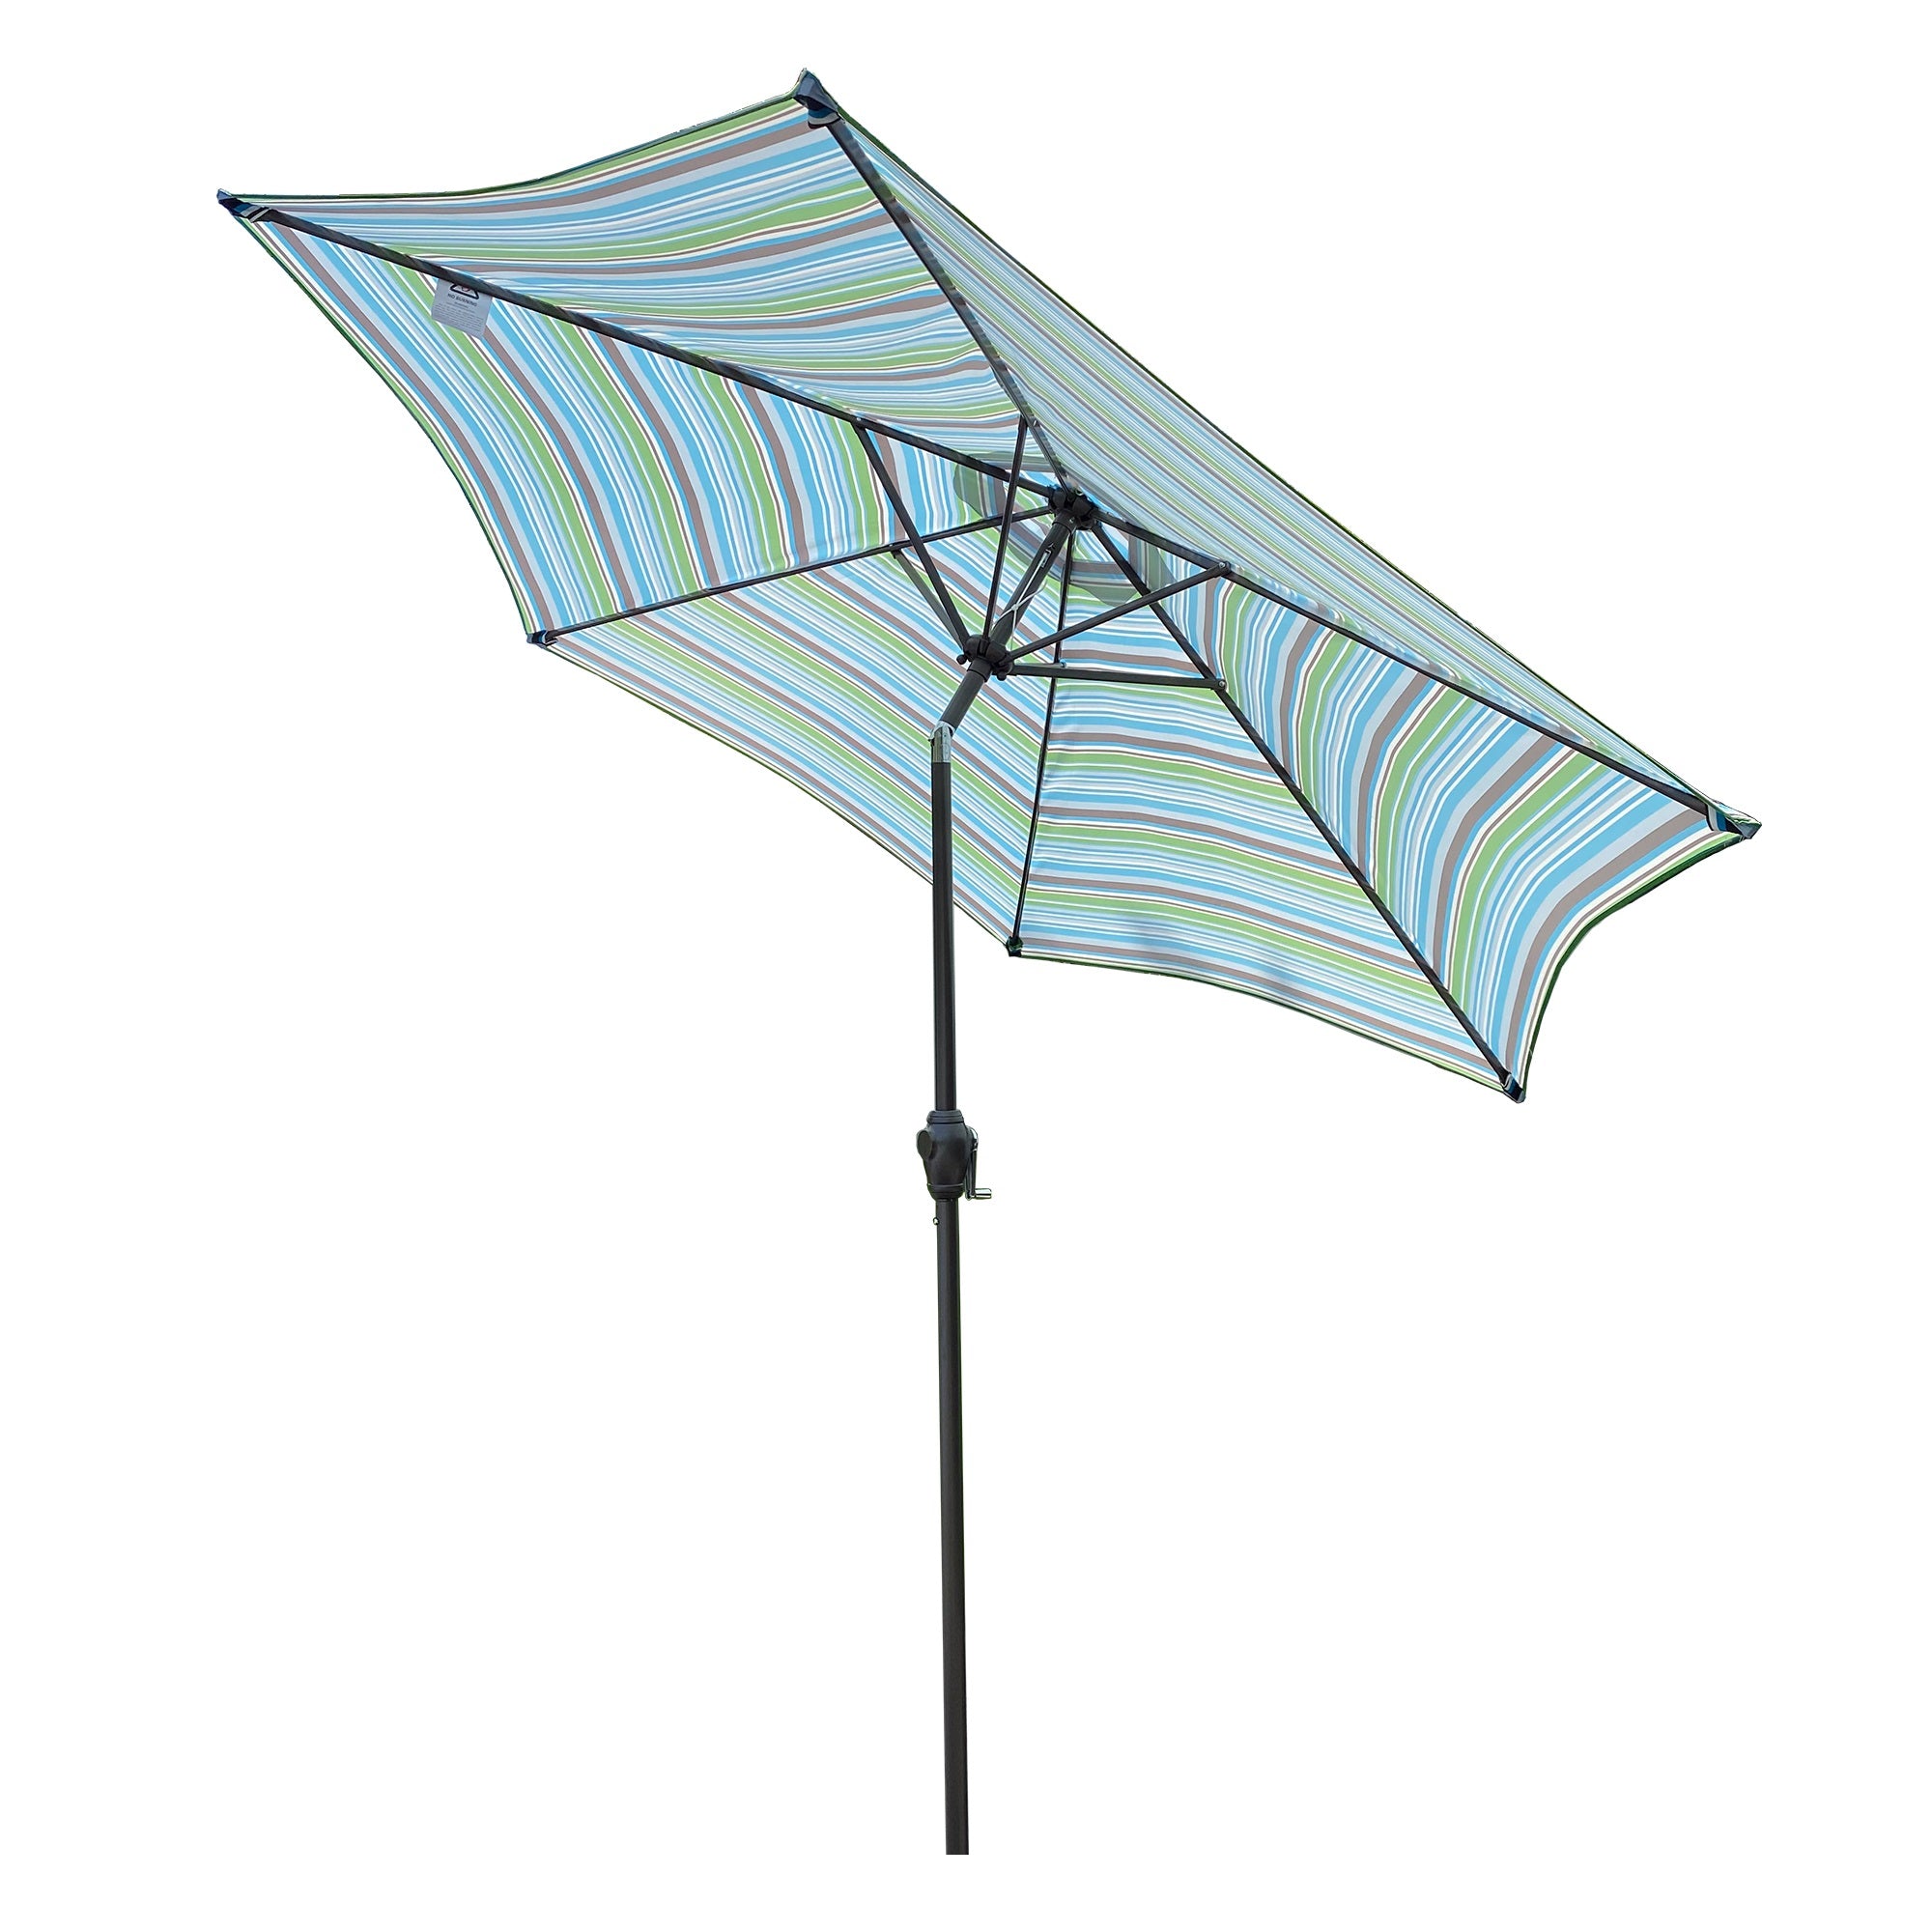 ametoys Outdoor Patio 9-Feet Market Table Umbrella with Push Button Tilt and Crank, Blue Stripes[Umbrella Base is not Included]